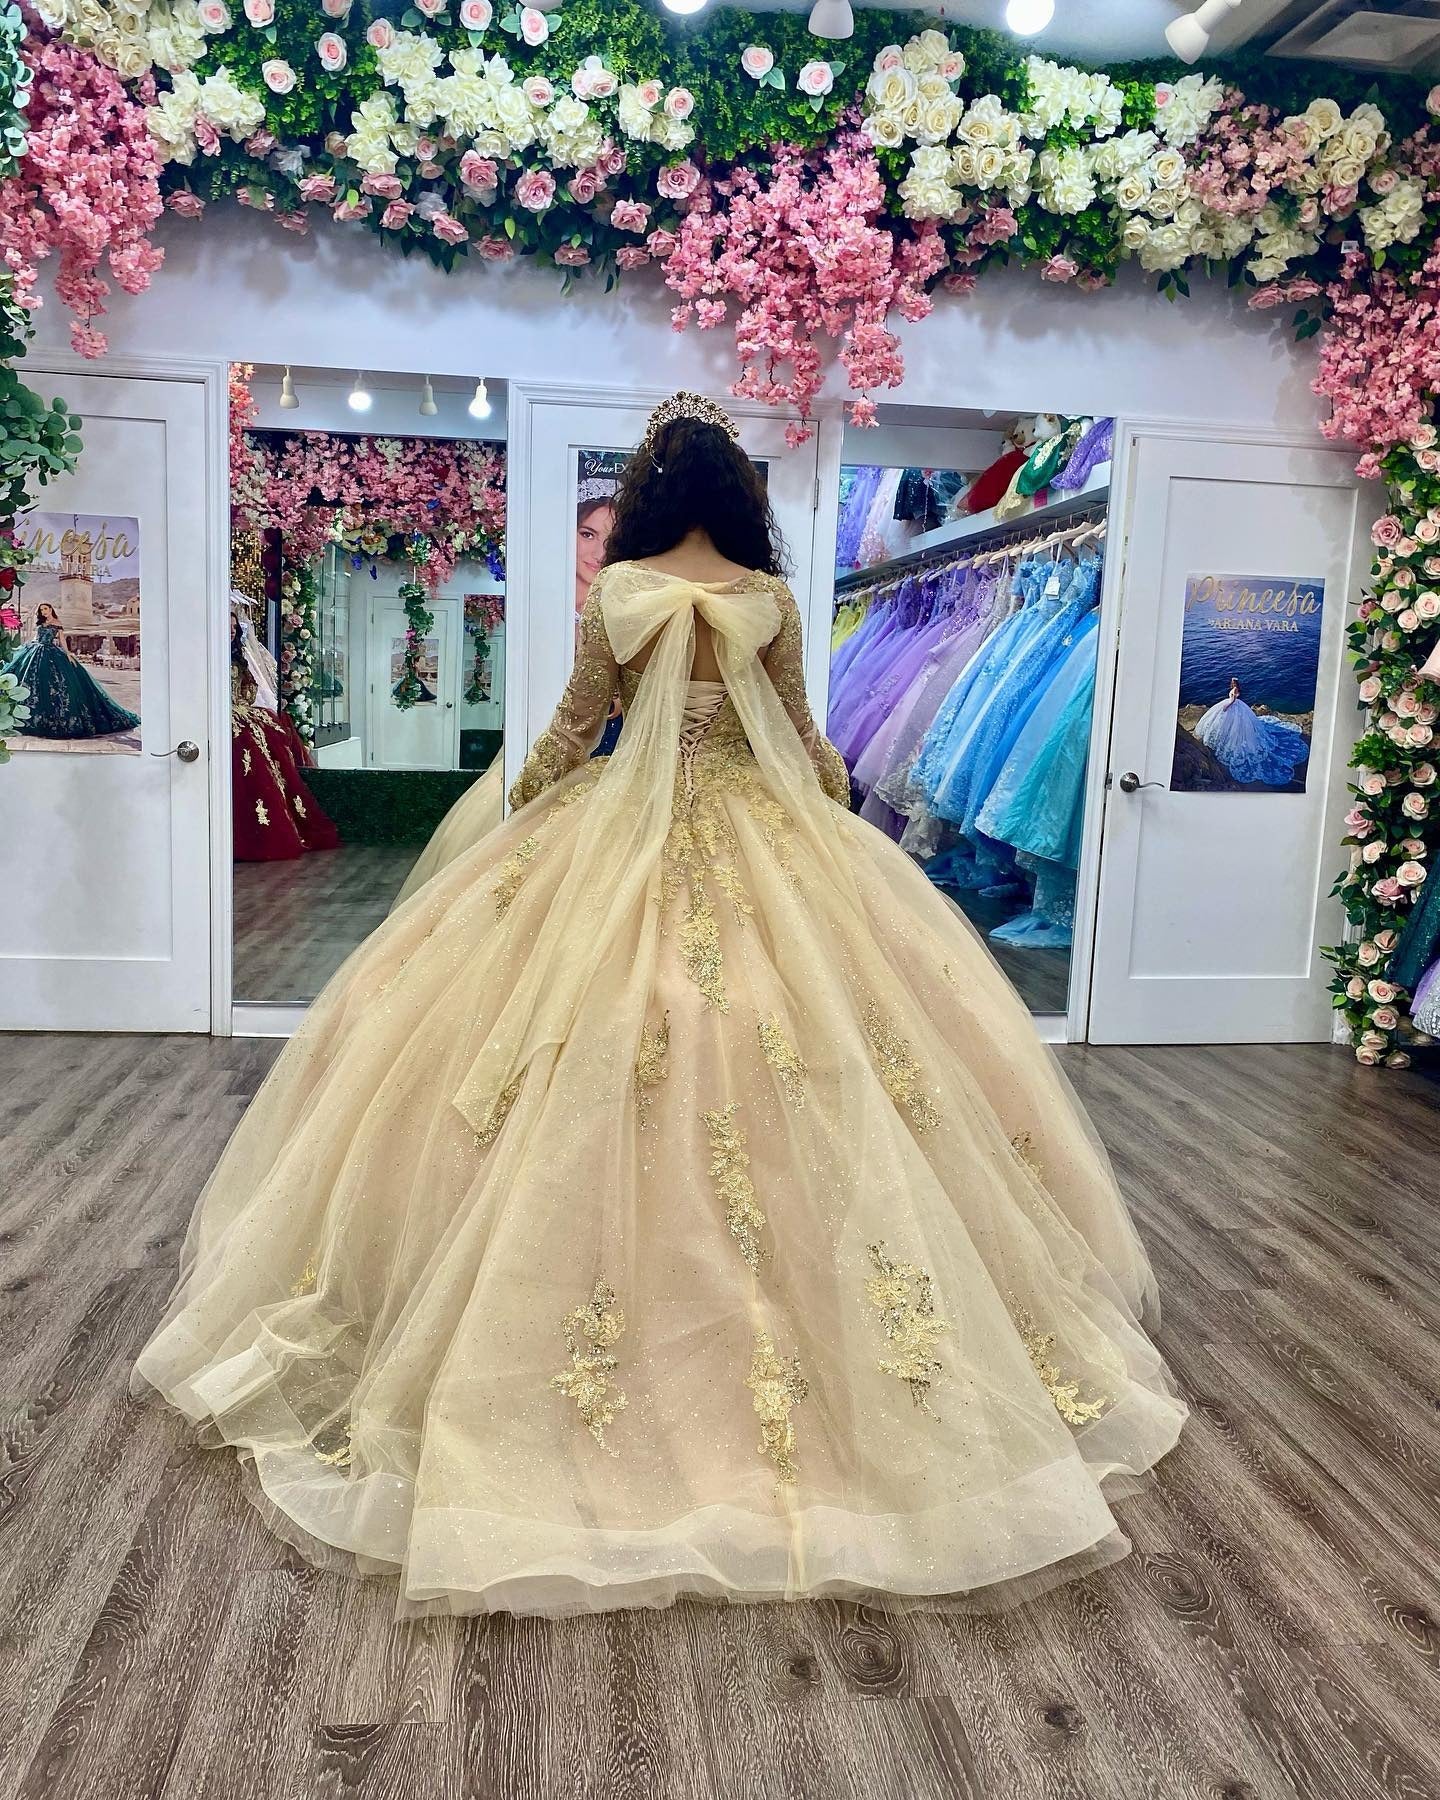 Sweetheart Quinceanera Dresses with Long Sleeves Sparkly Lace Appliques Beaded Tulle Bow Formal Prom Party Gowns Sweet 16 Dress Princess Ball Gown